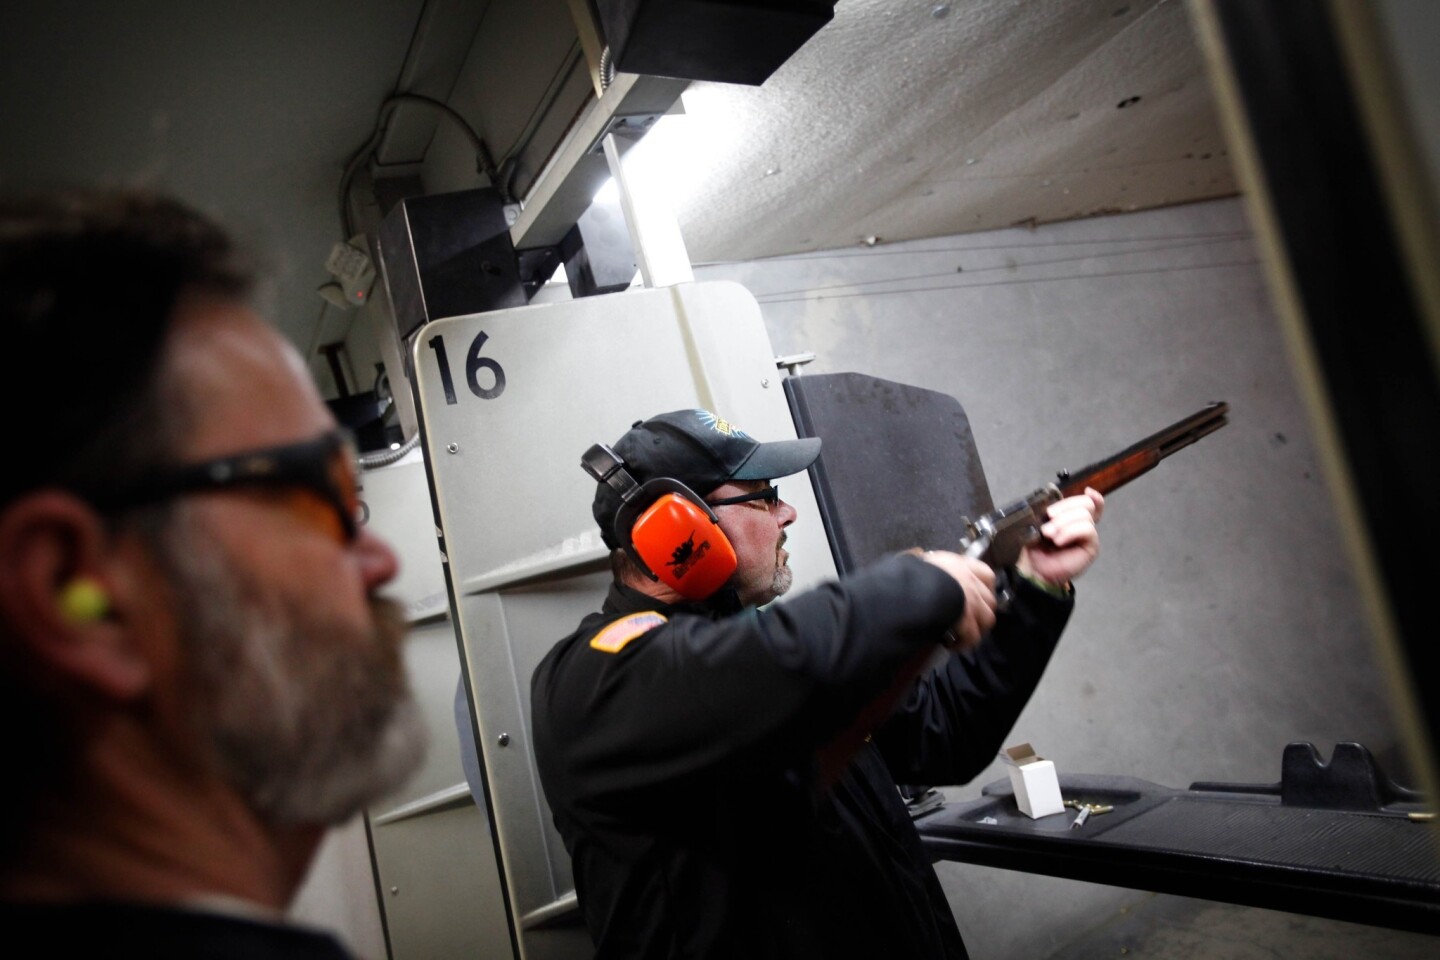 Tim Donnelly aims a Glock 19 at a paper target at a gun range in Watsonville.